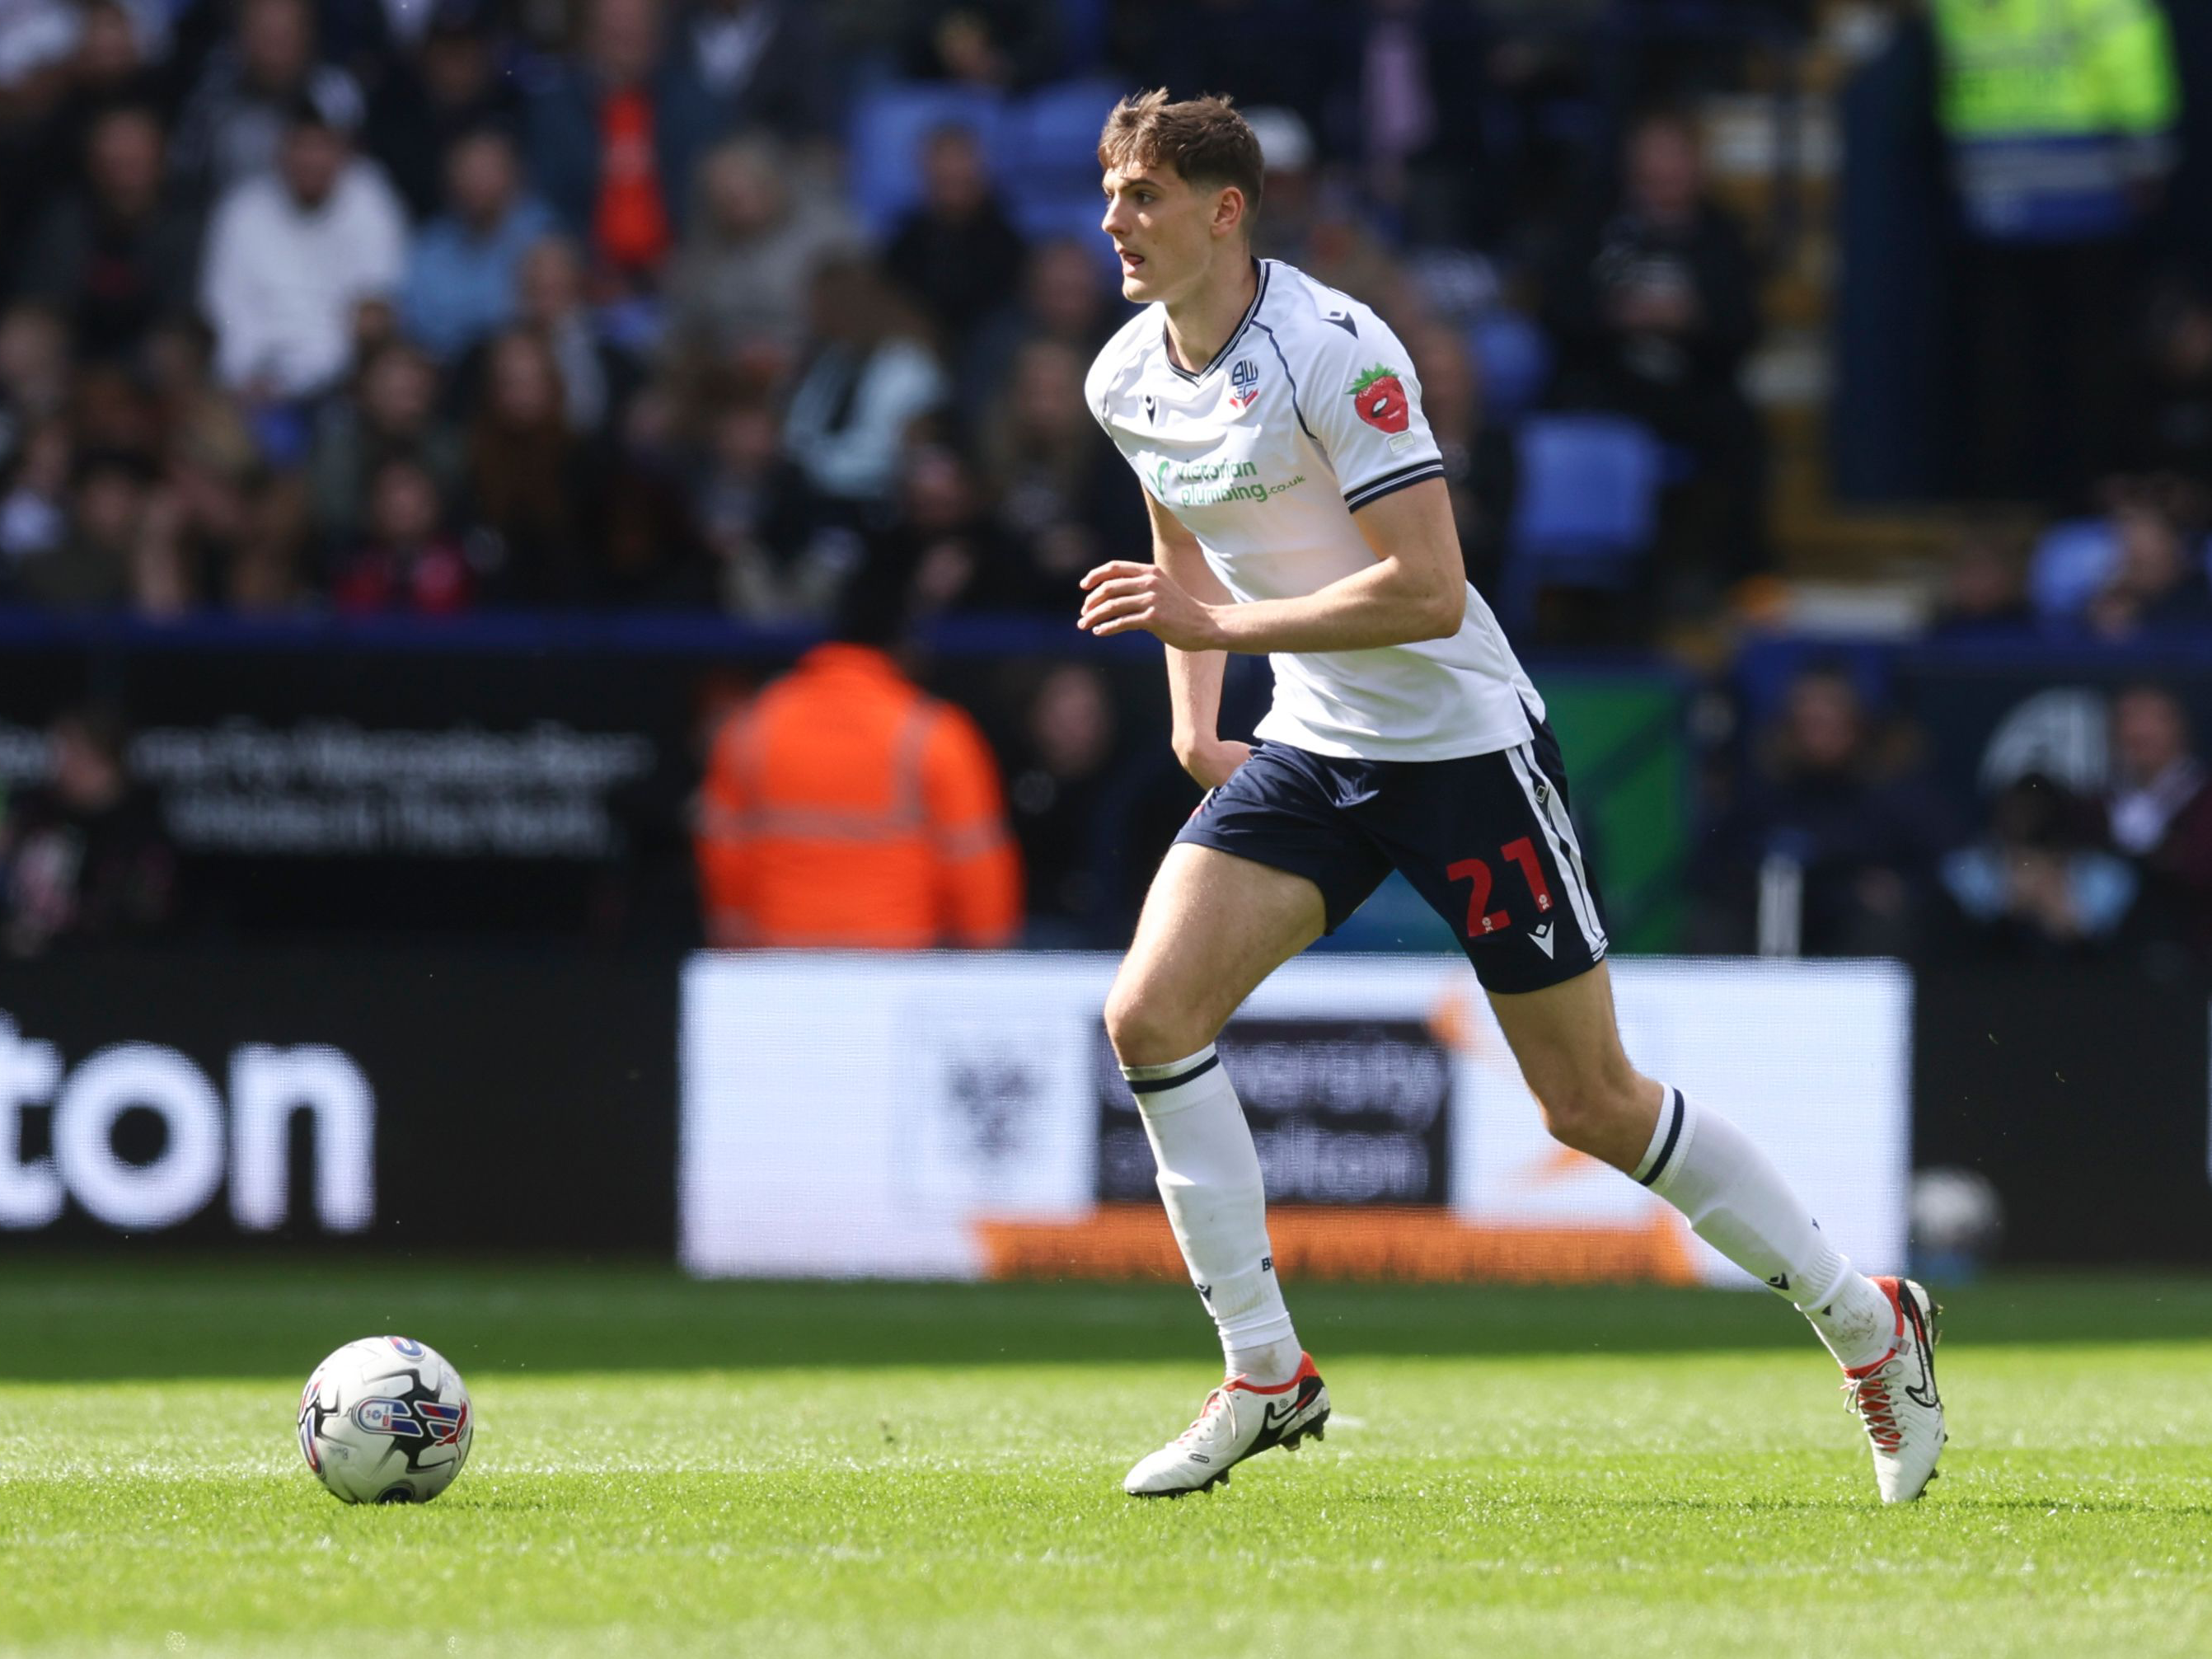 A photo of Caleb Taylor in action for loan club Bolton Wanderers in their 23/24 white home kit